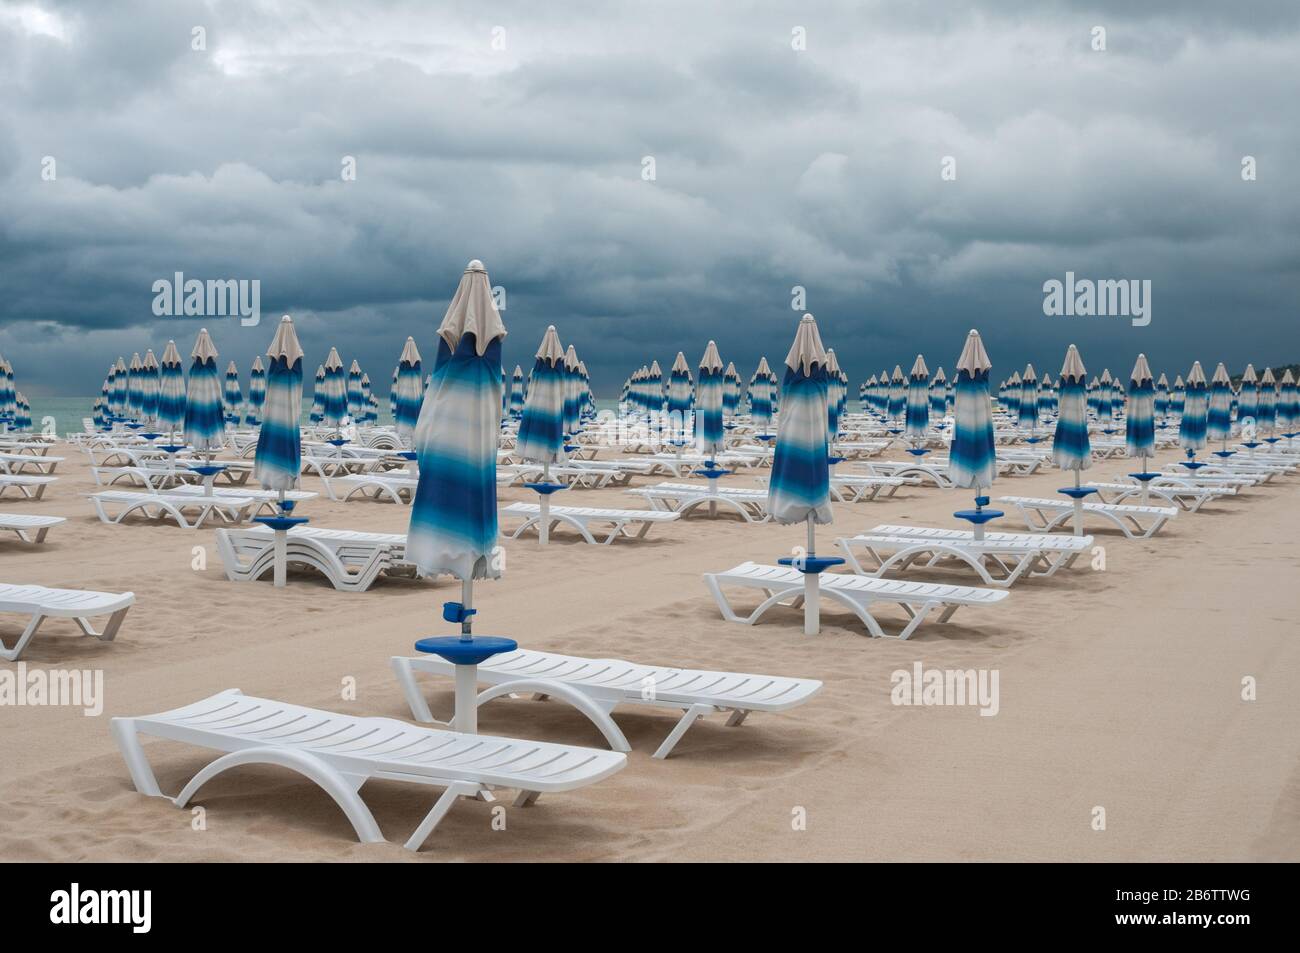 Sunshades has been closed, the spell of fine weather has broken. Beach season is finished. Stock Photo